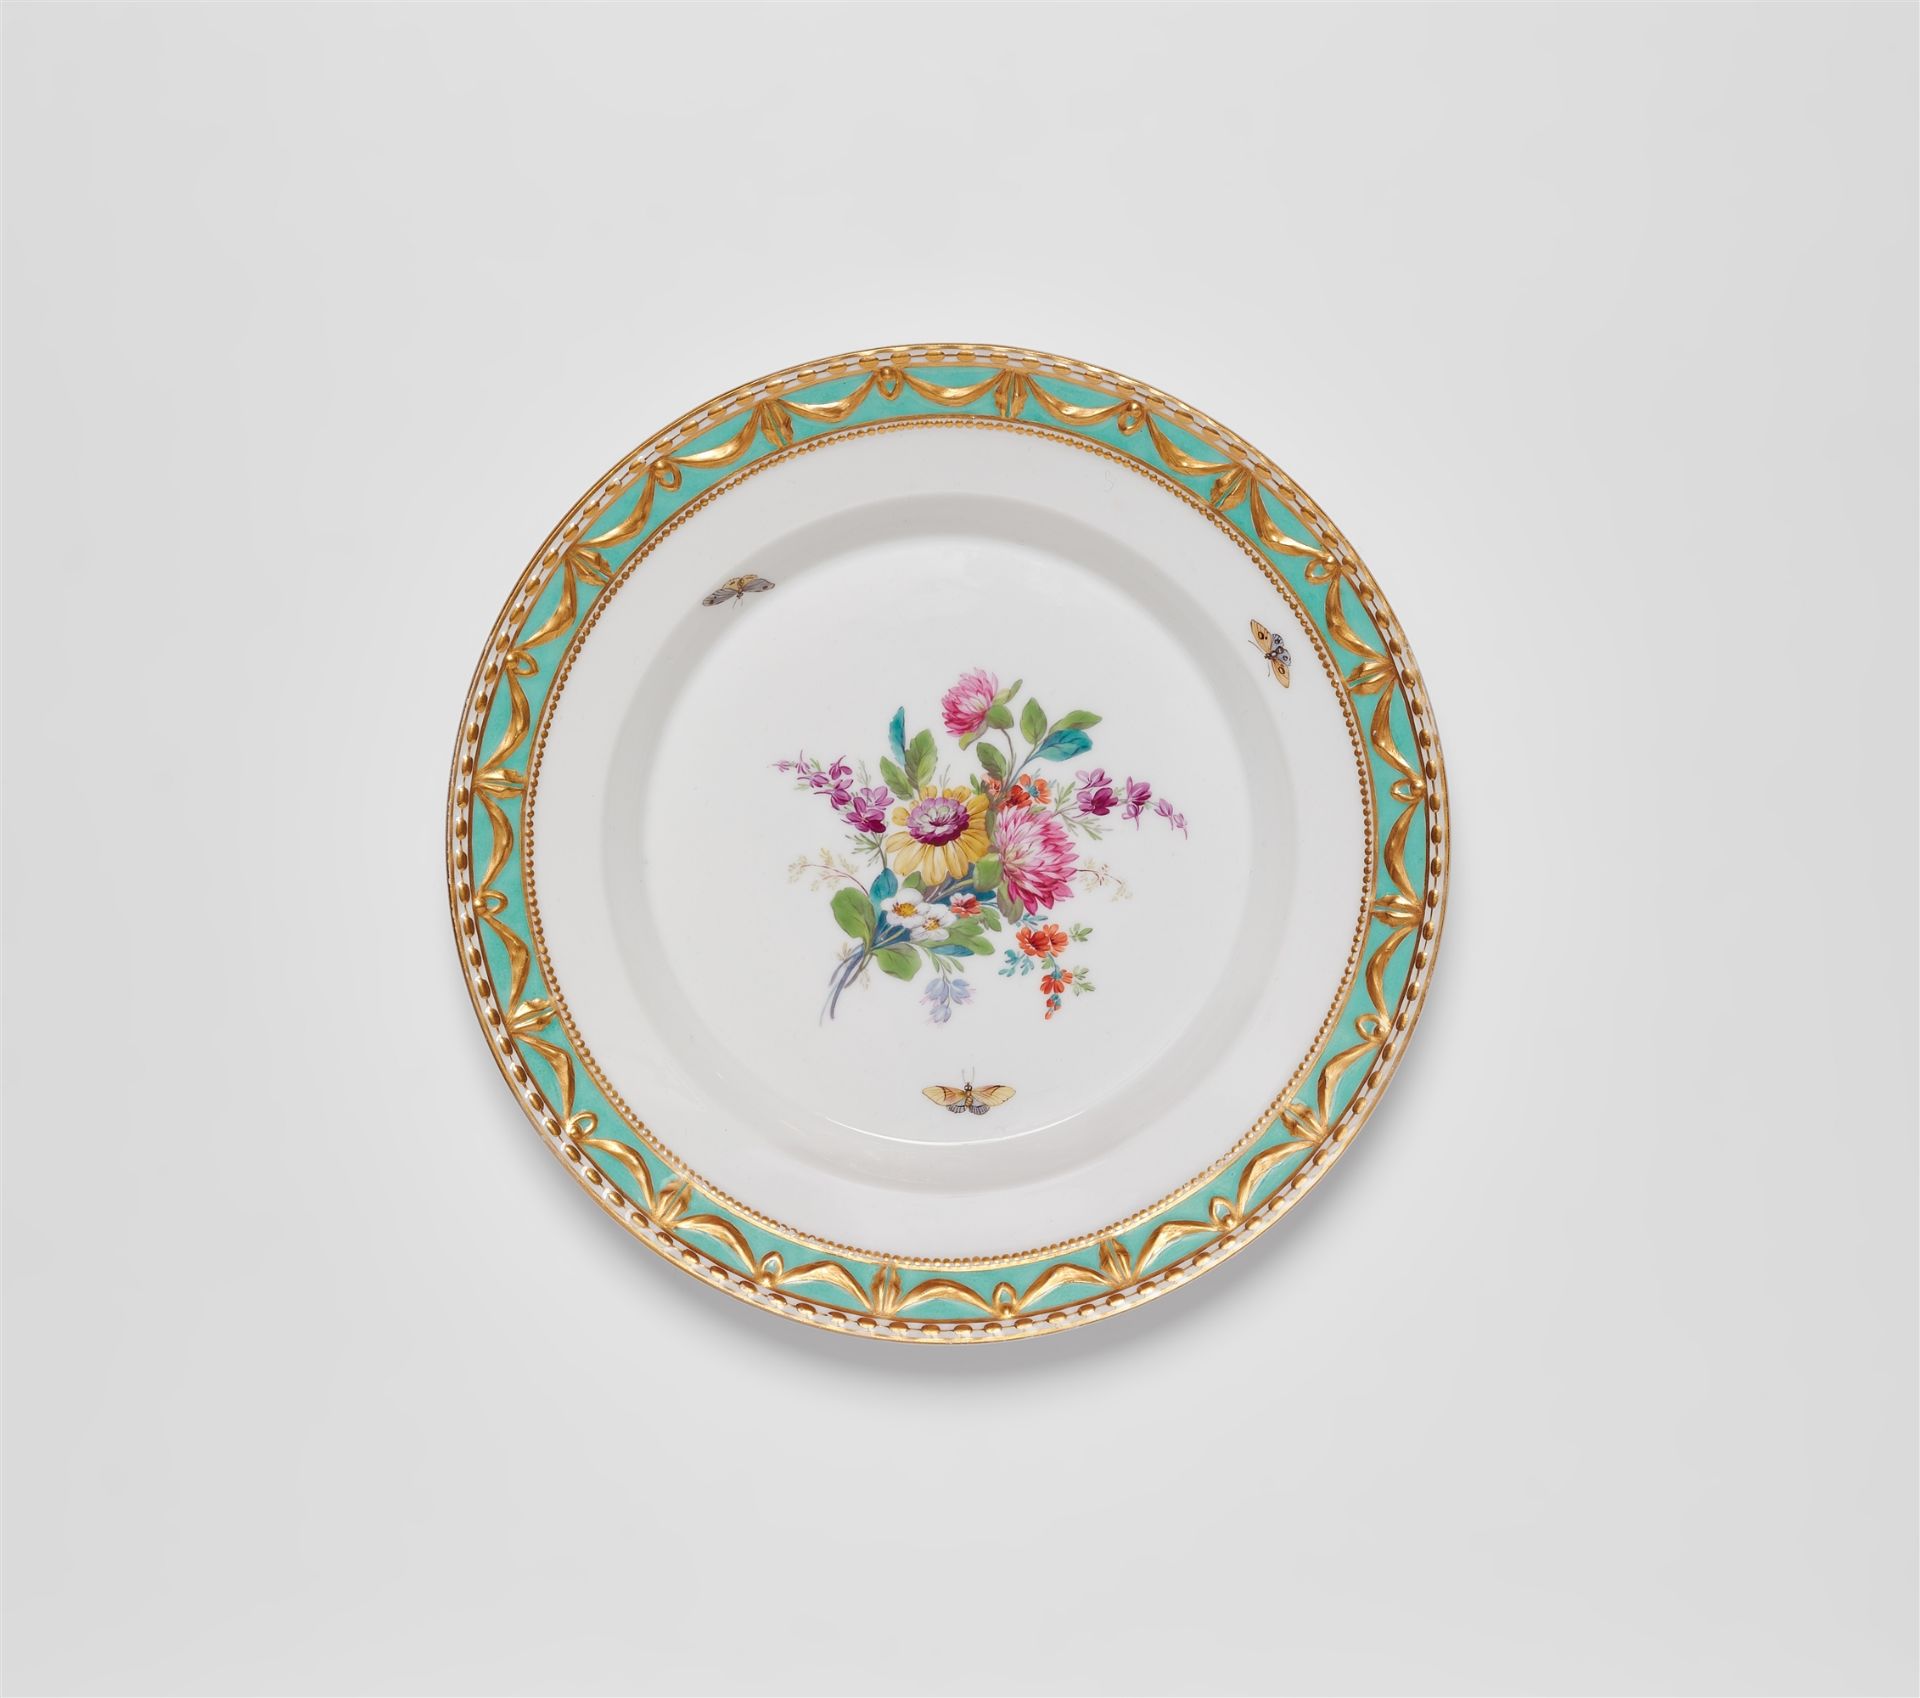 A Berlin KPM porcelain plate from a dinner service for Prince Heinrich of Prussia